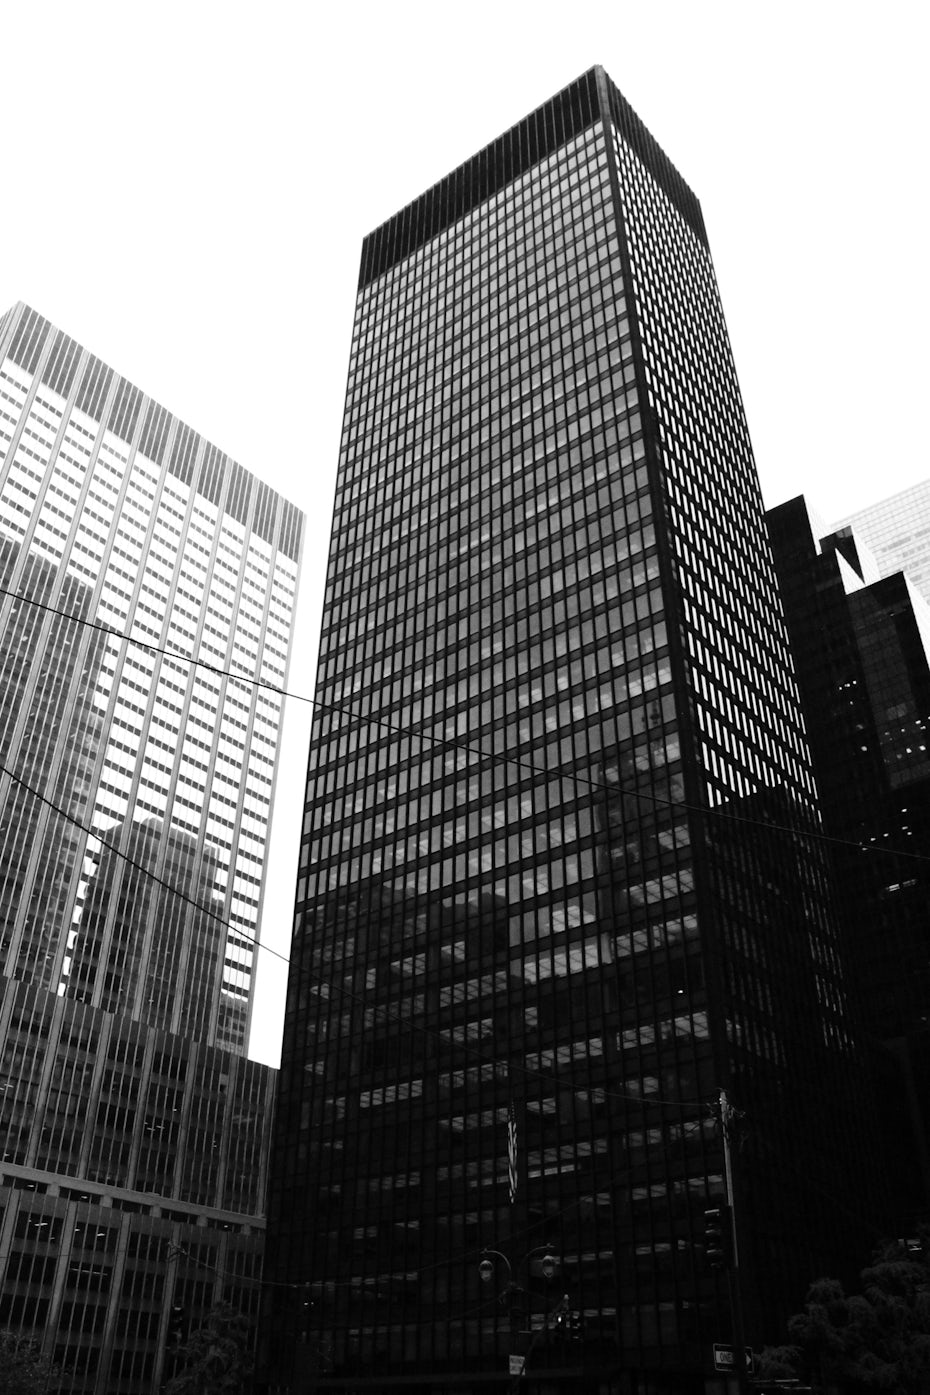  The Seagram building, modern architecture